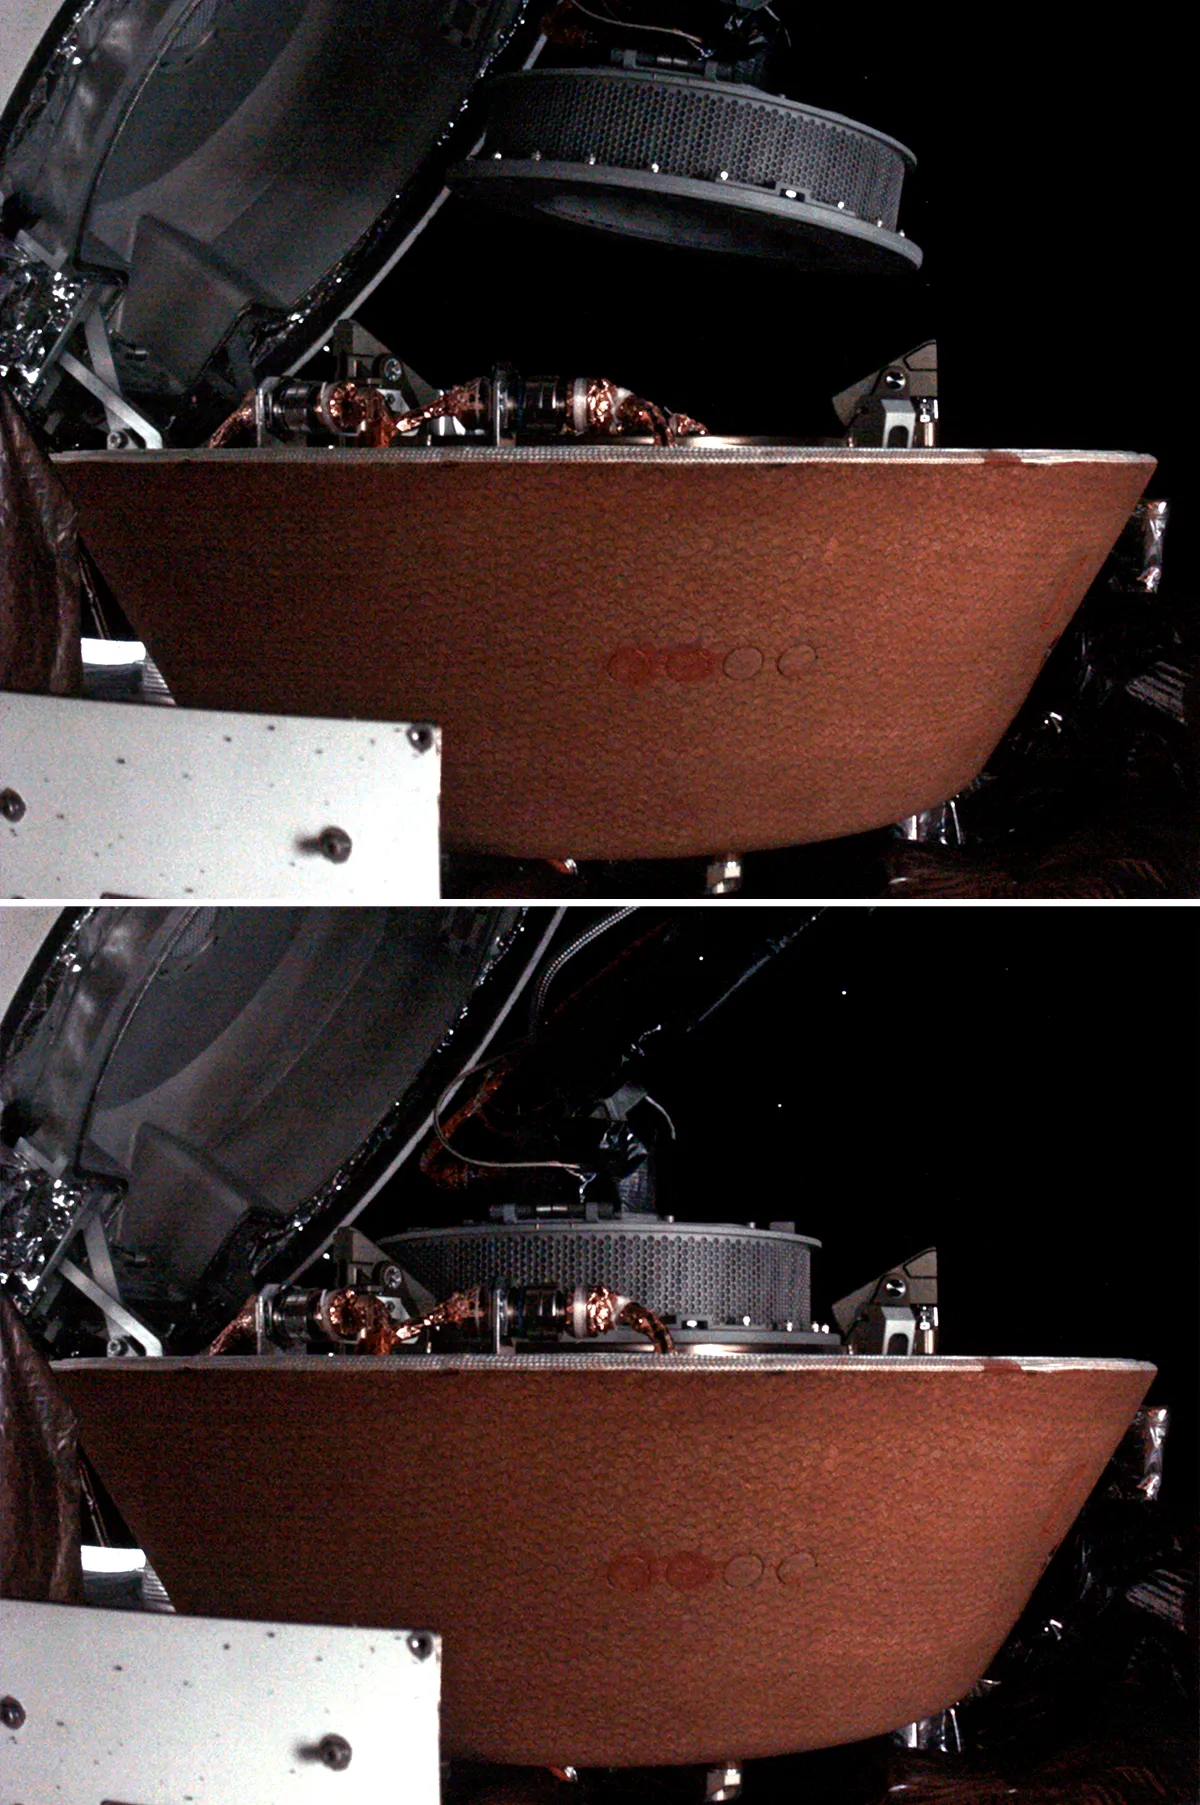 Two images of the TAGSAM sample container being stowed on the OSIRIS-REx spacecraft. Particles taken from Bennu are seen escaping in the bottom picture. Credit: NASA/Goddard/University of Arizona/Lockheed Martin